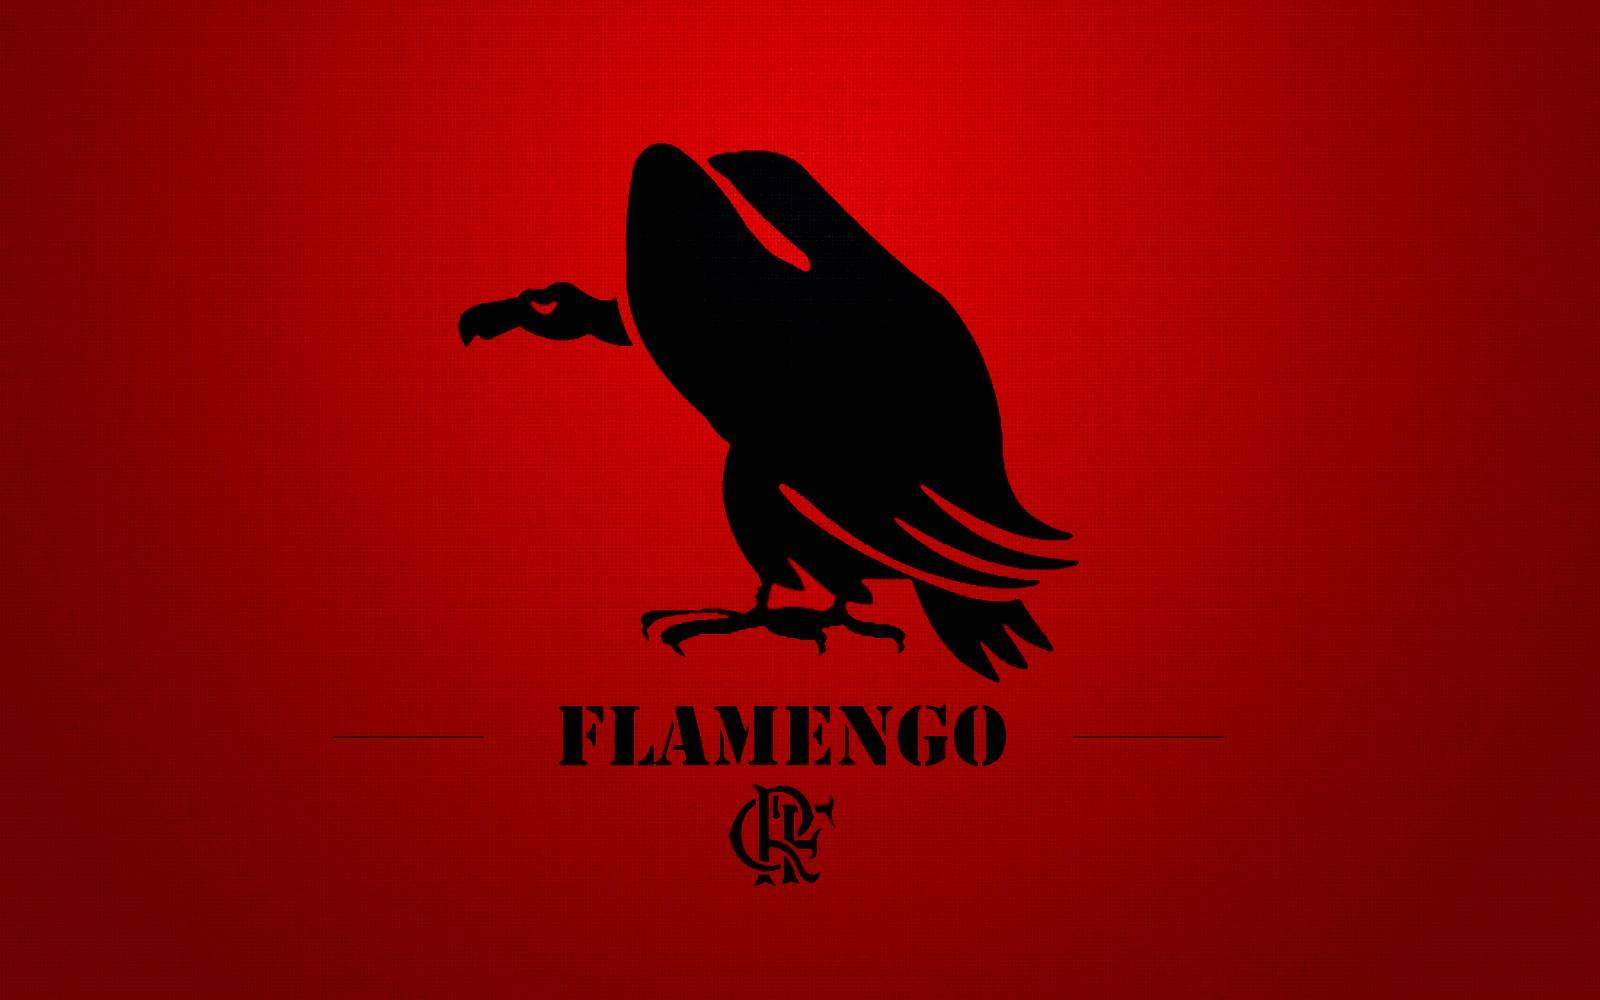 Vultureflamengo Fc Could Be Translated To Spanish As 